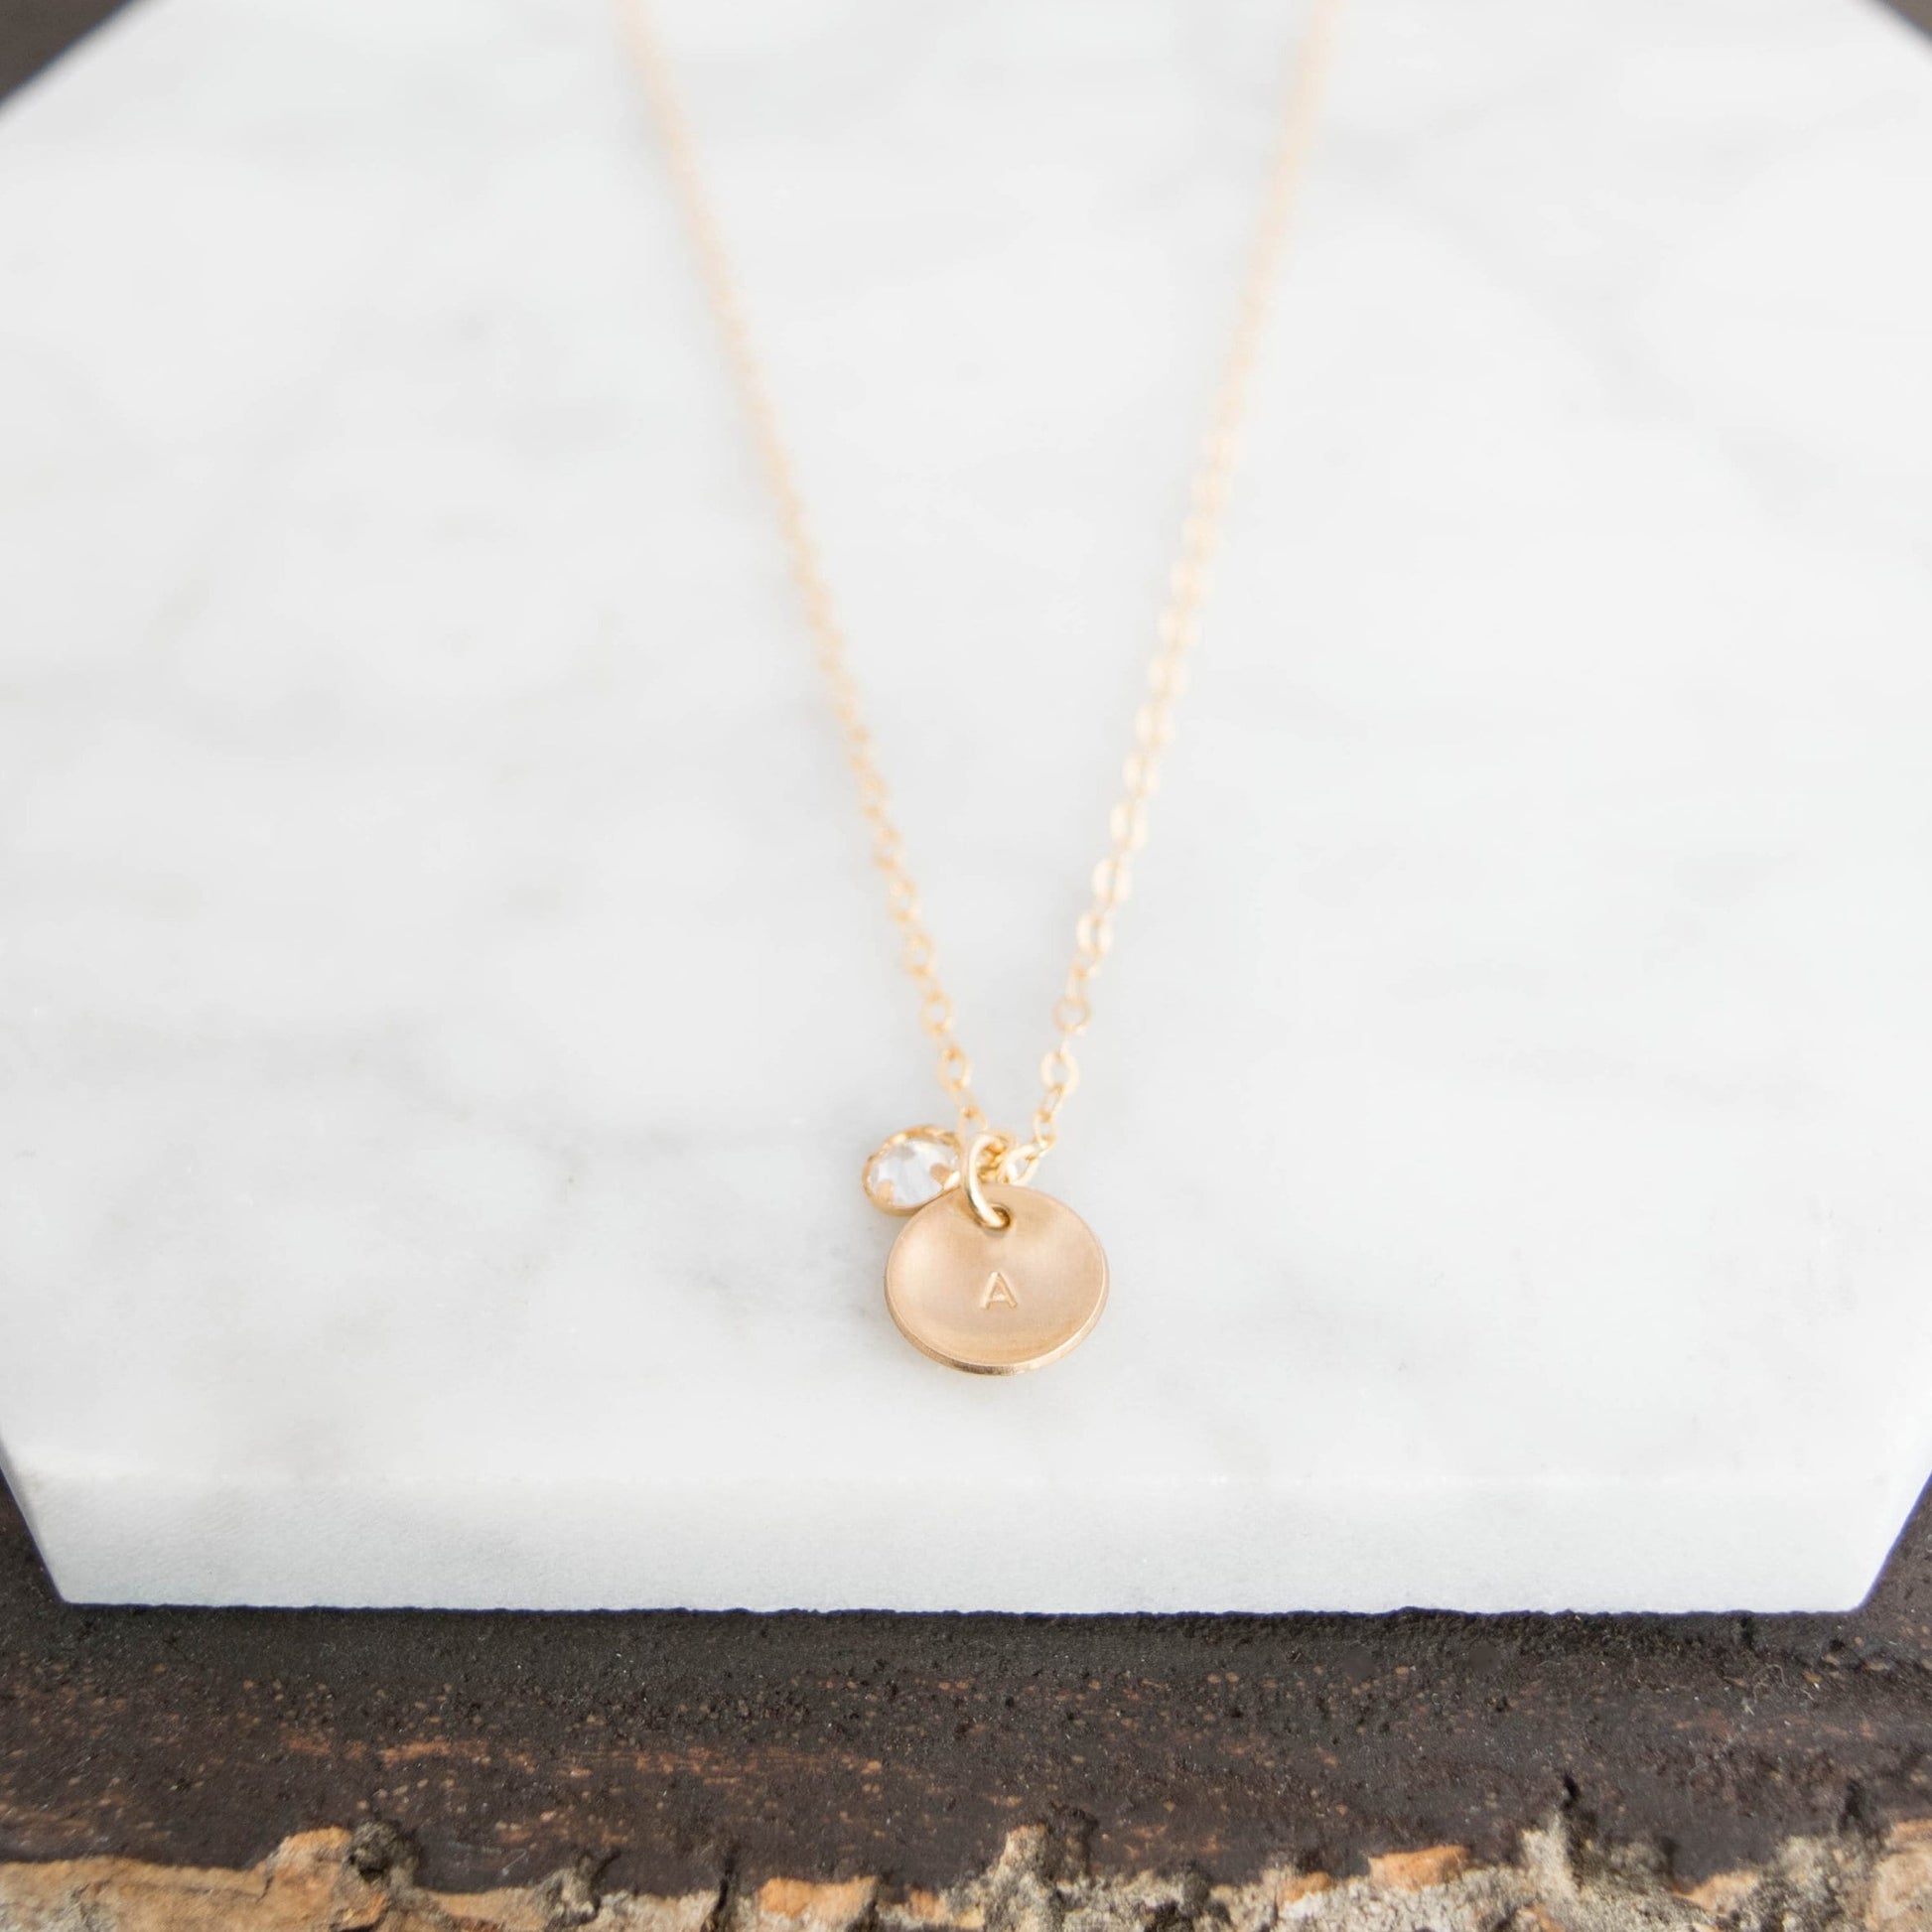 Subtly Hidden Initial Disc Necklace - Minimalist and Elegant Personalized Handmade Jewelry